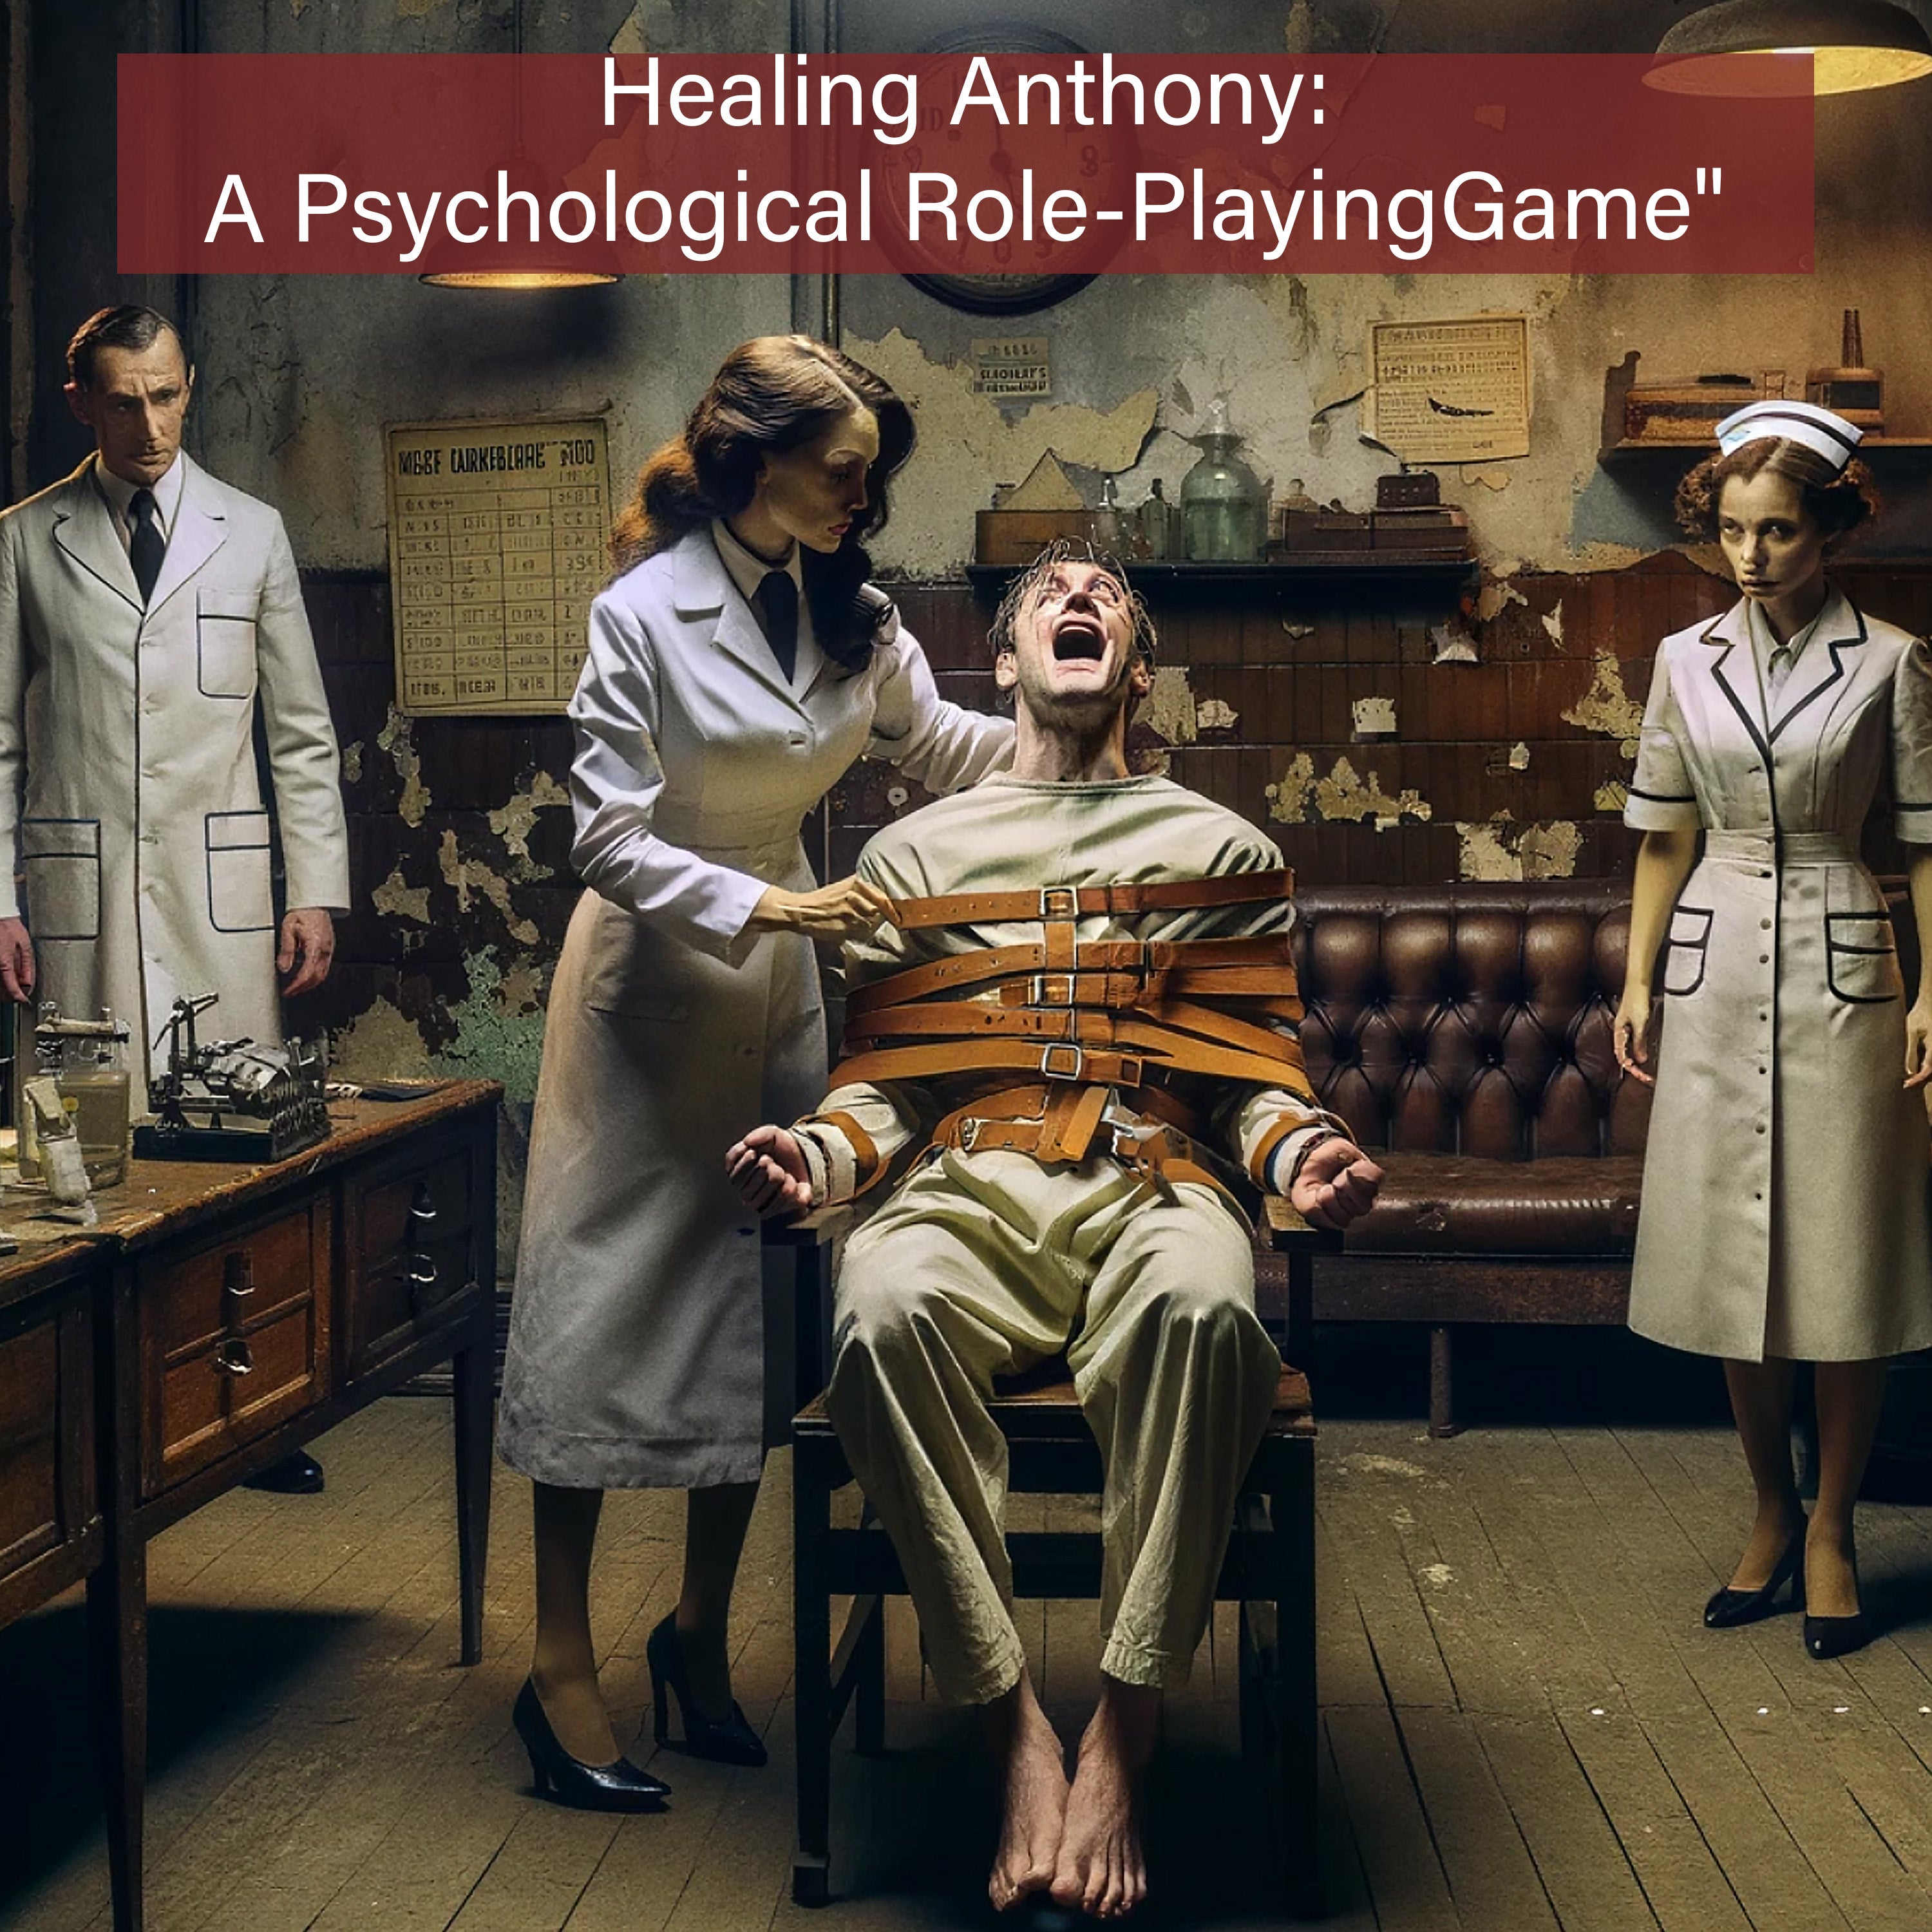 Healing Anthony: A Psychological Role-Playing Game